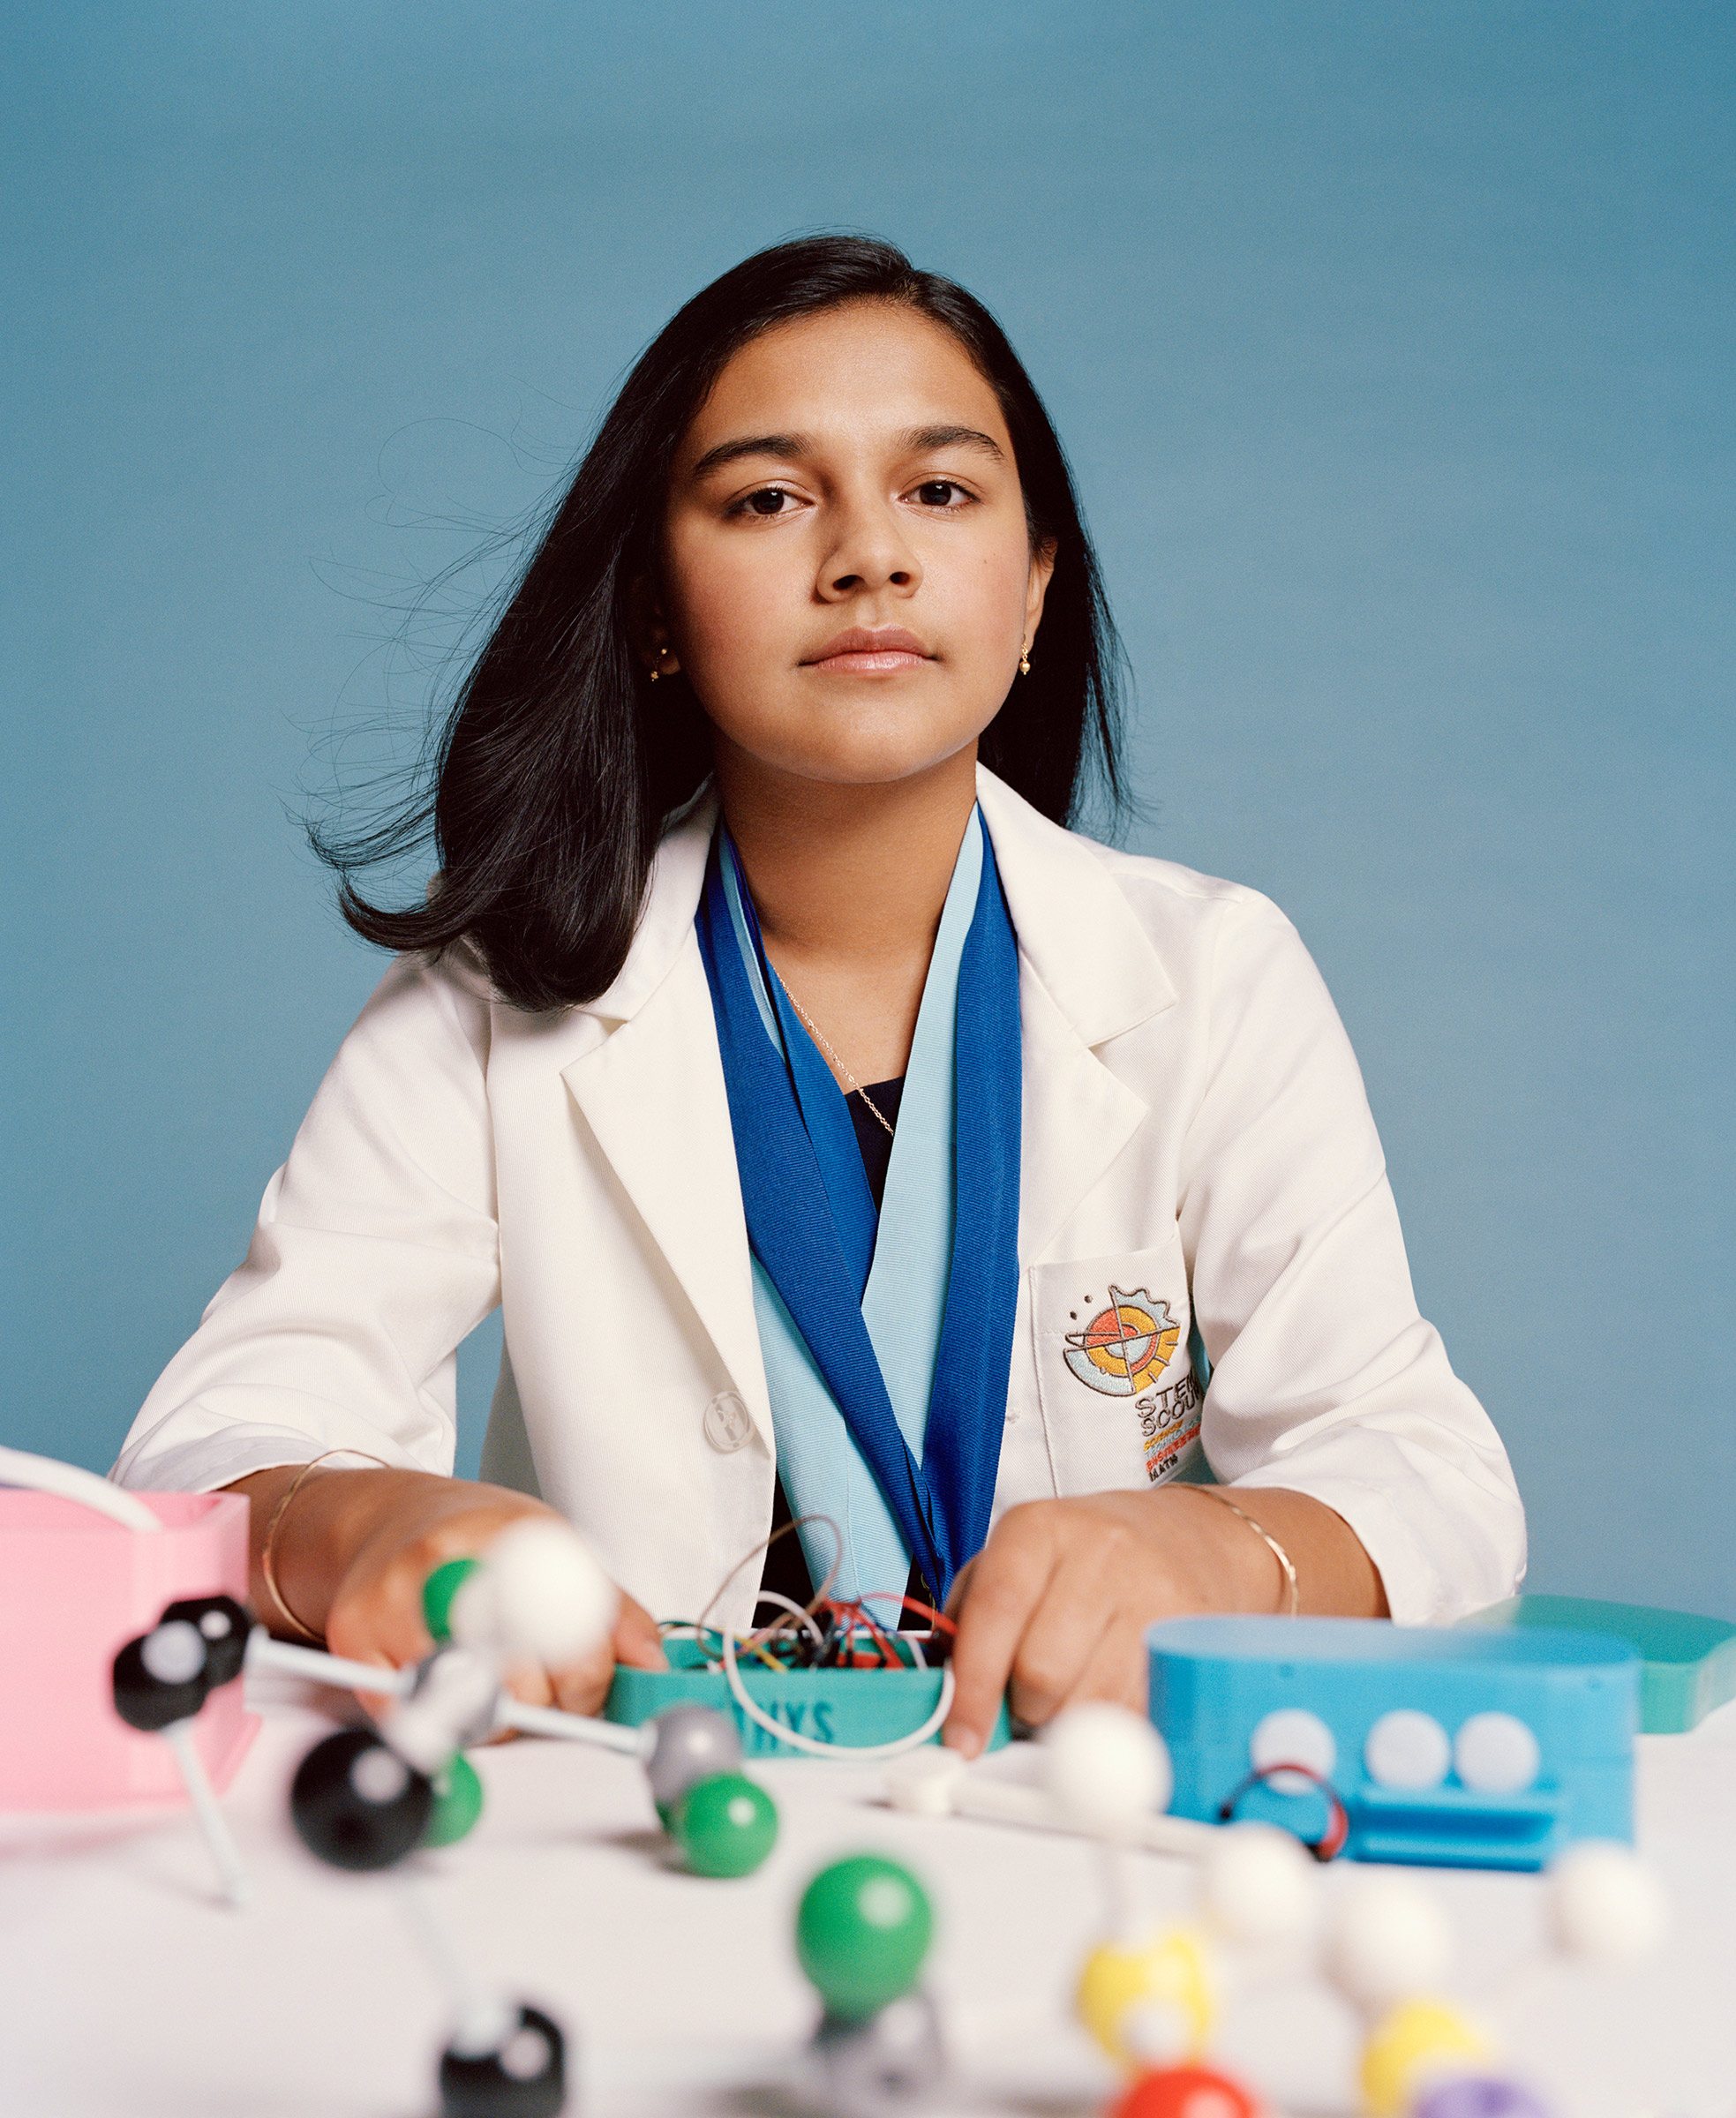 Gitanjali Rao loves to problem-solve and experiment with everything from artificial-intelligence technology to baking (Sharif Hamza for TIME)